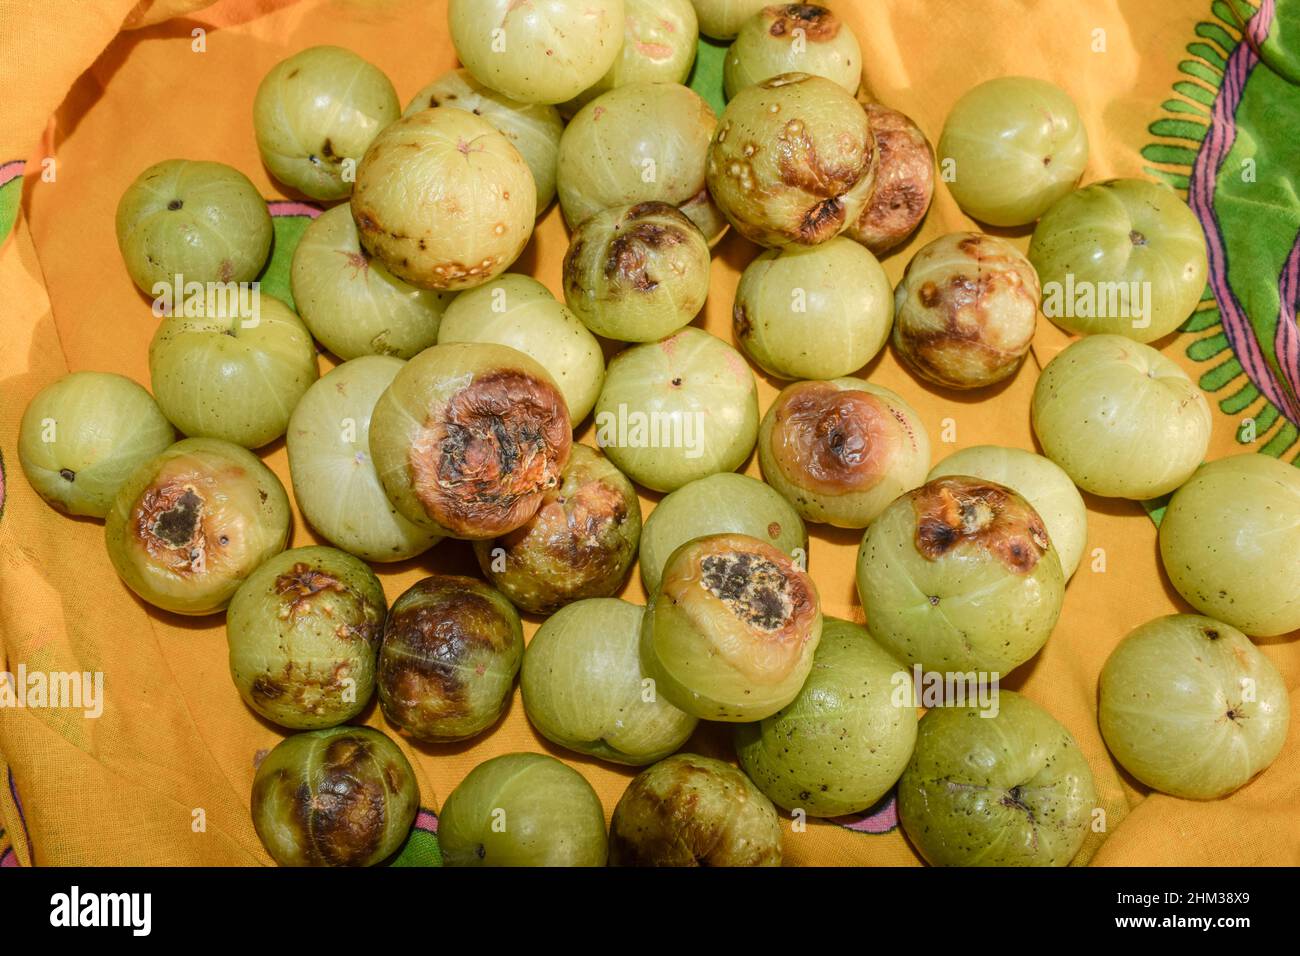 Rotten Amla or Indian gooseberry fruits after harvest. Over ripe fruit rot black spots brown spots fungus molds spoilt damage Stock Photo